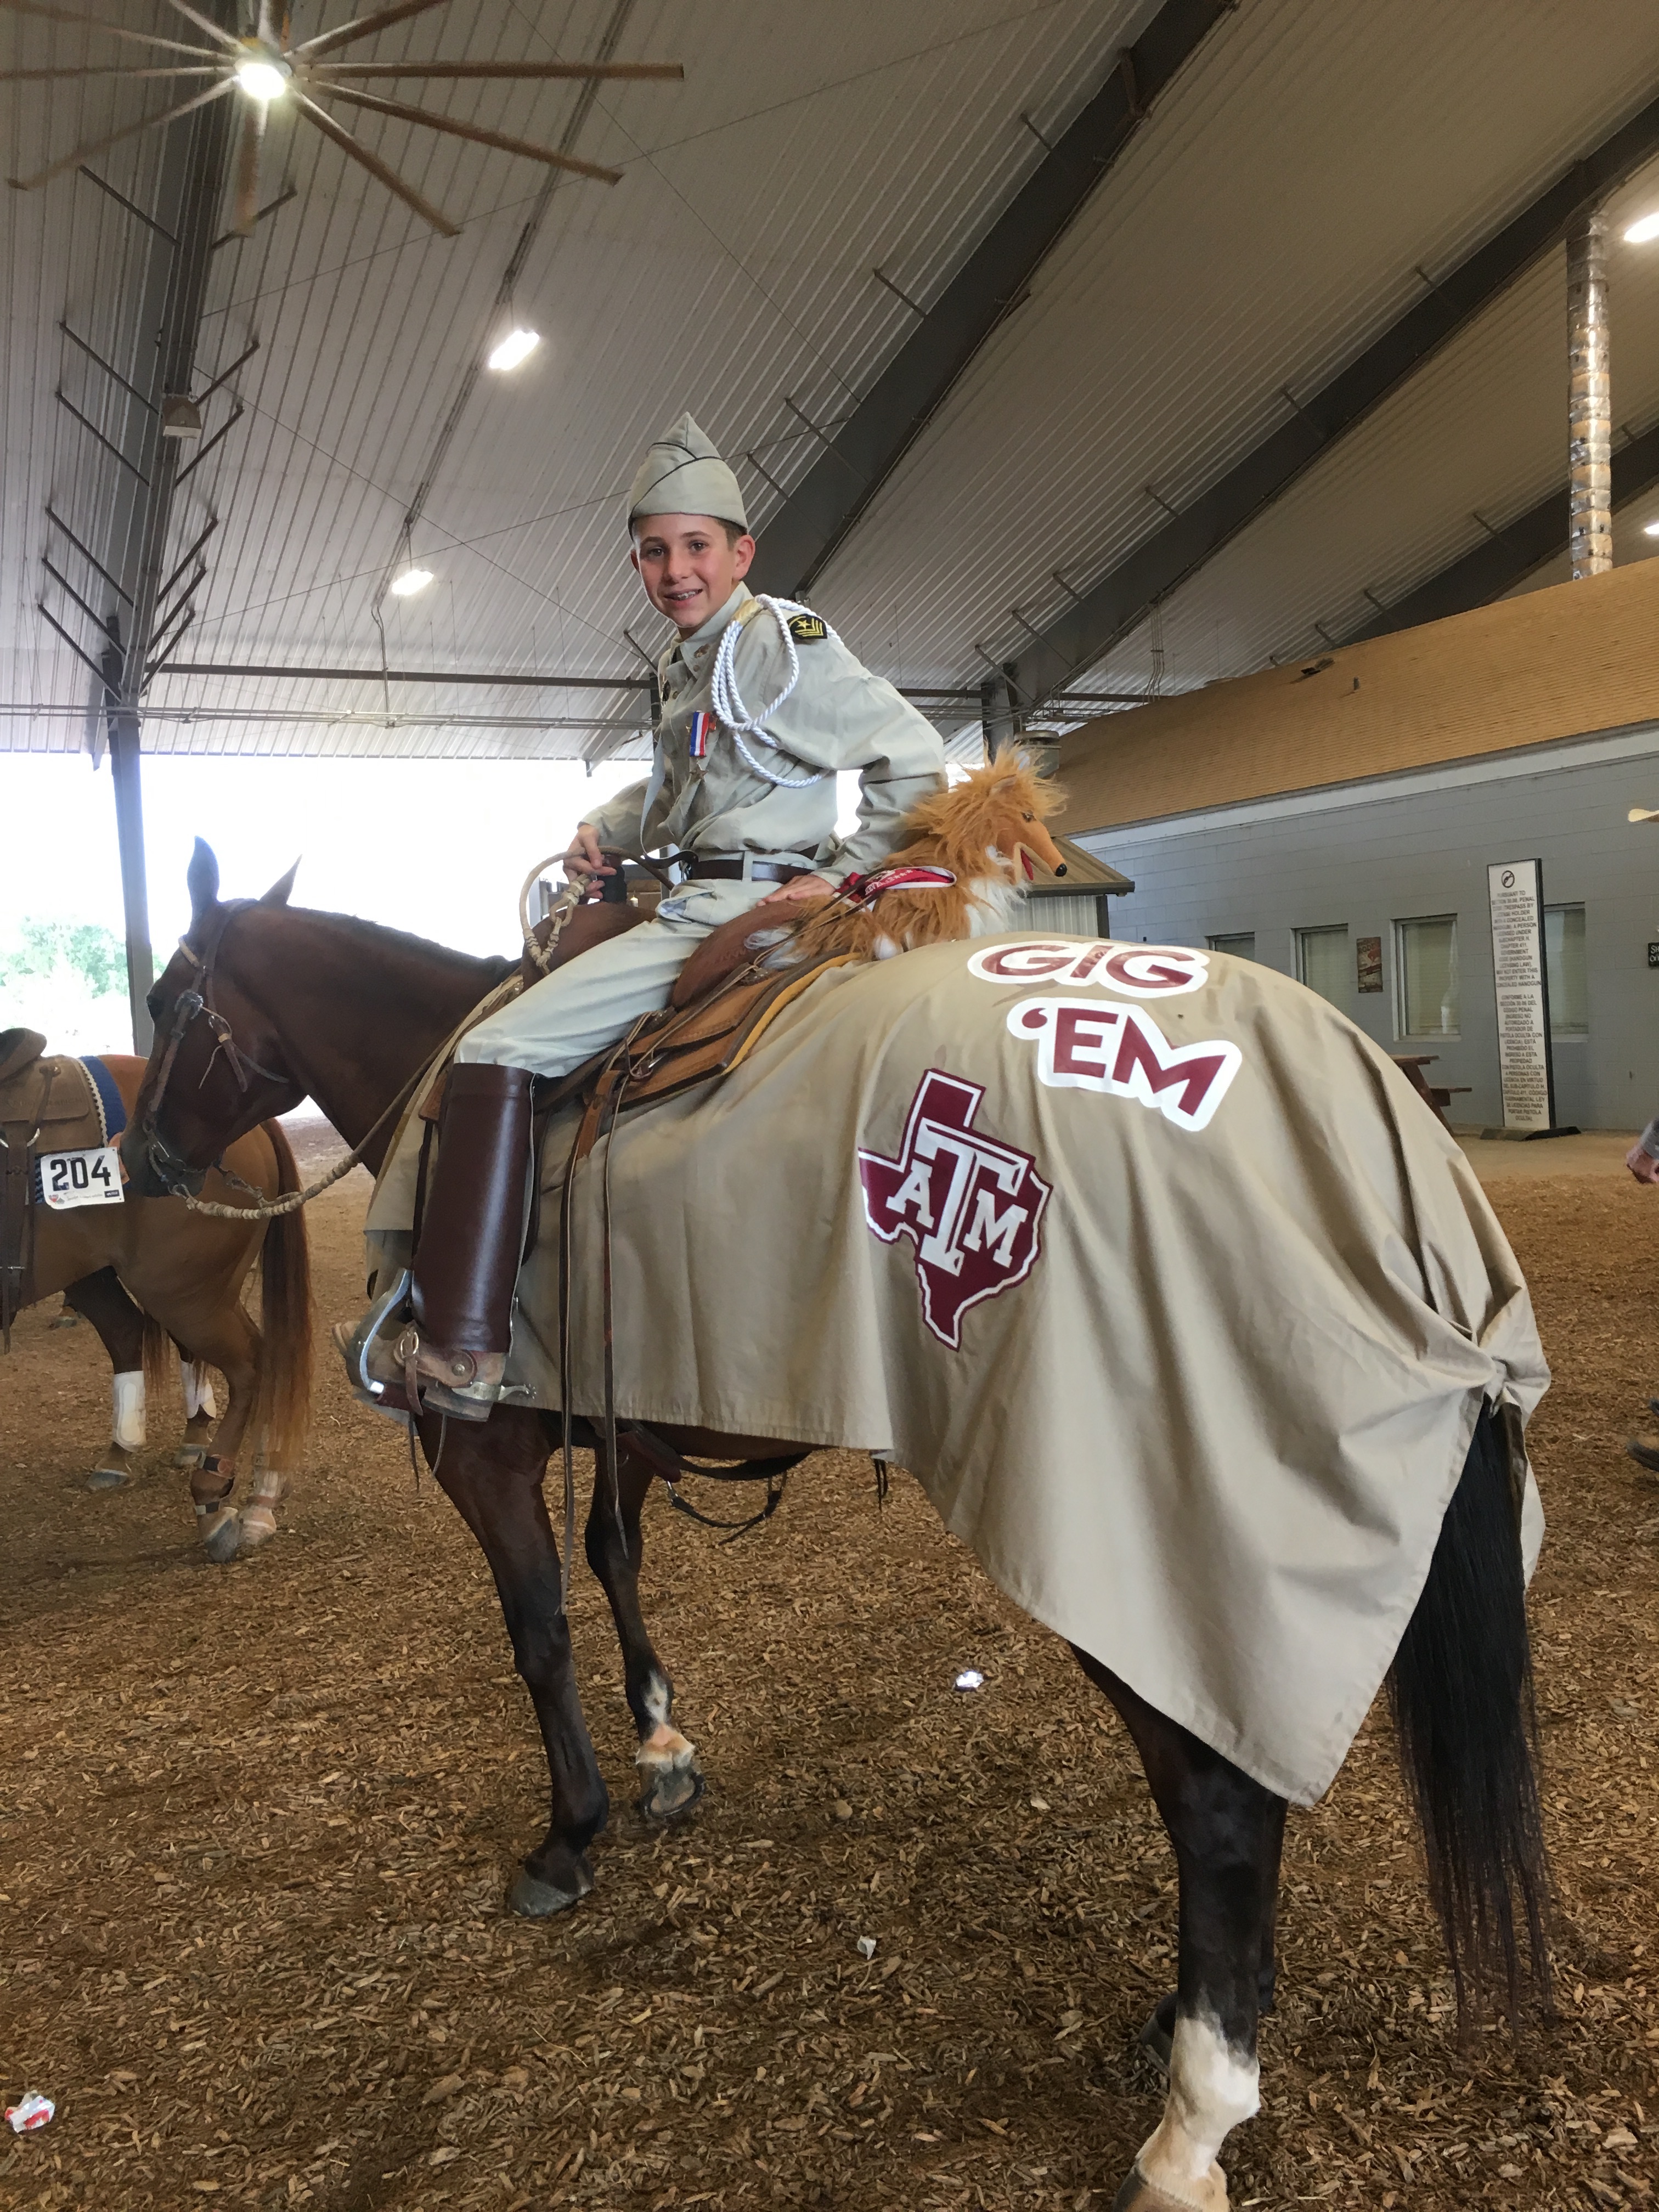 4H youth and horse dressed like a member of the Texas A&M University Corps of Cadets during the freestyle reining event.